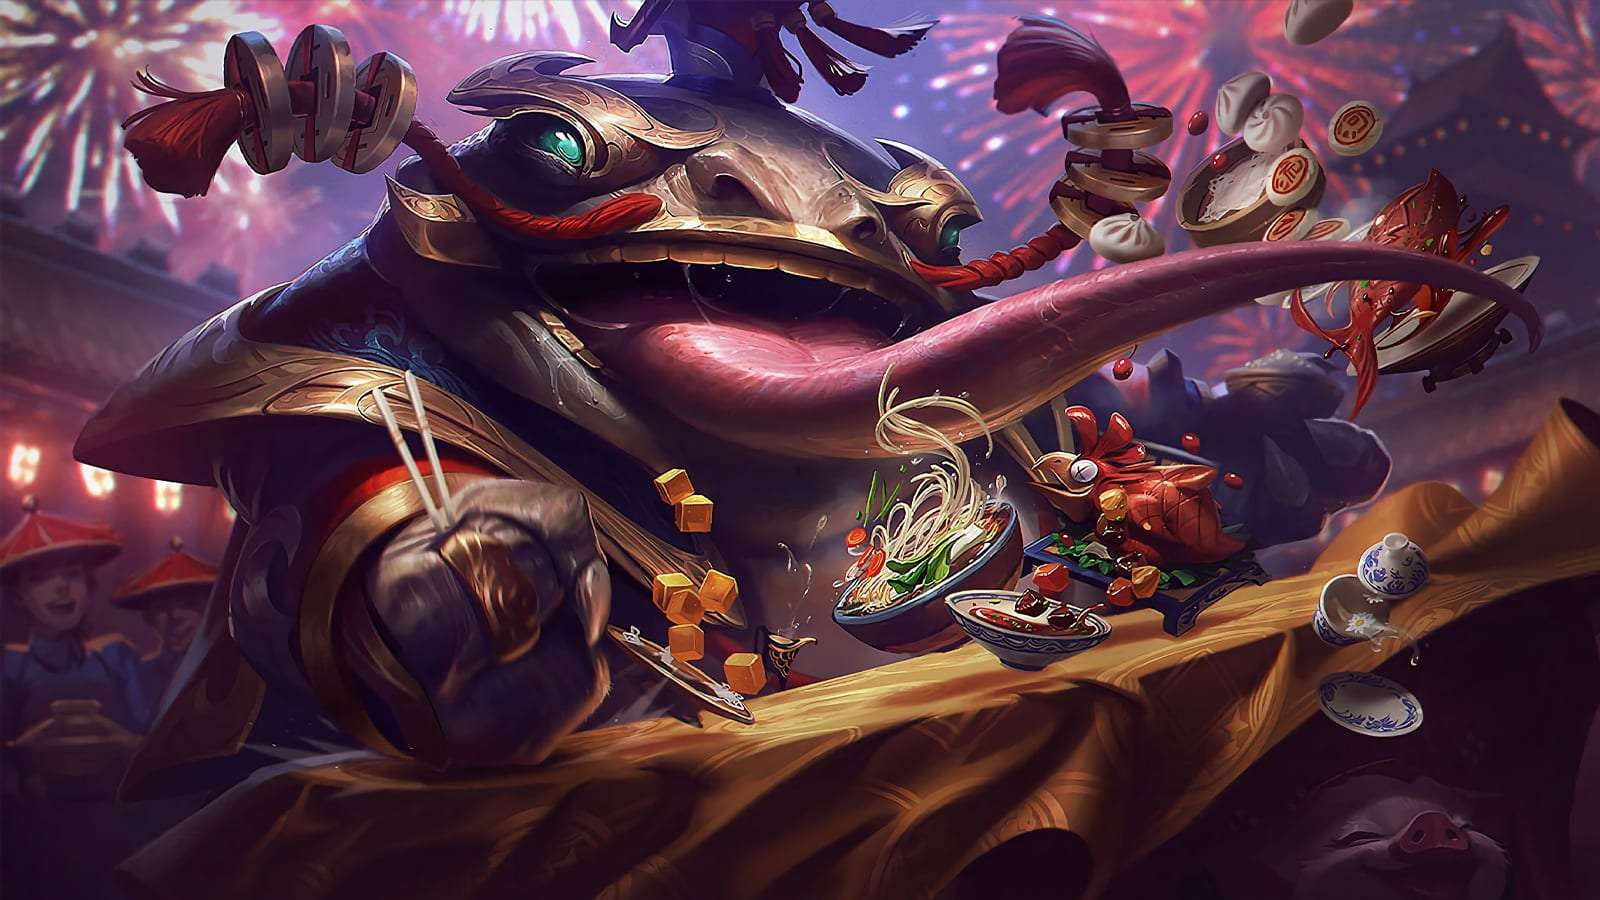 Coin Emperor Tahm Kench in League of Legends